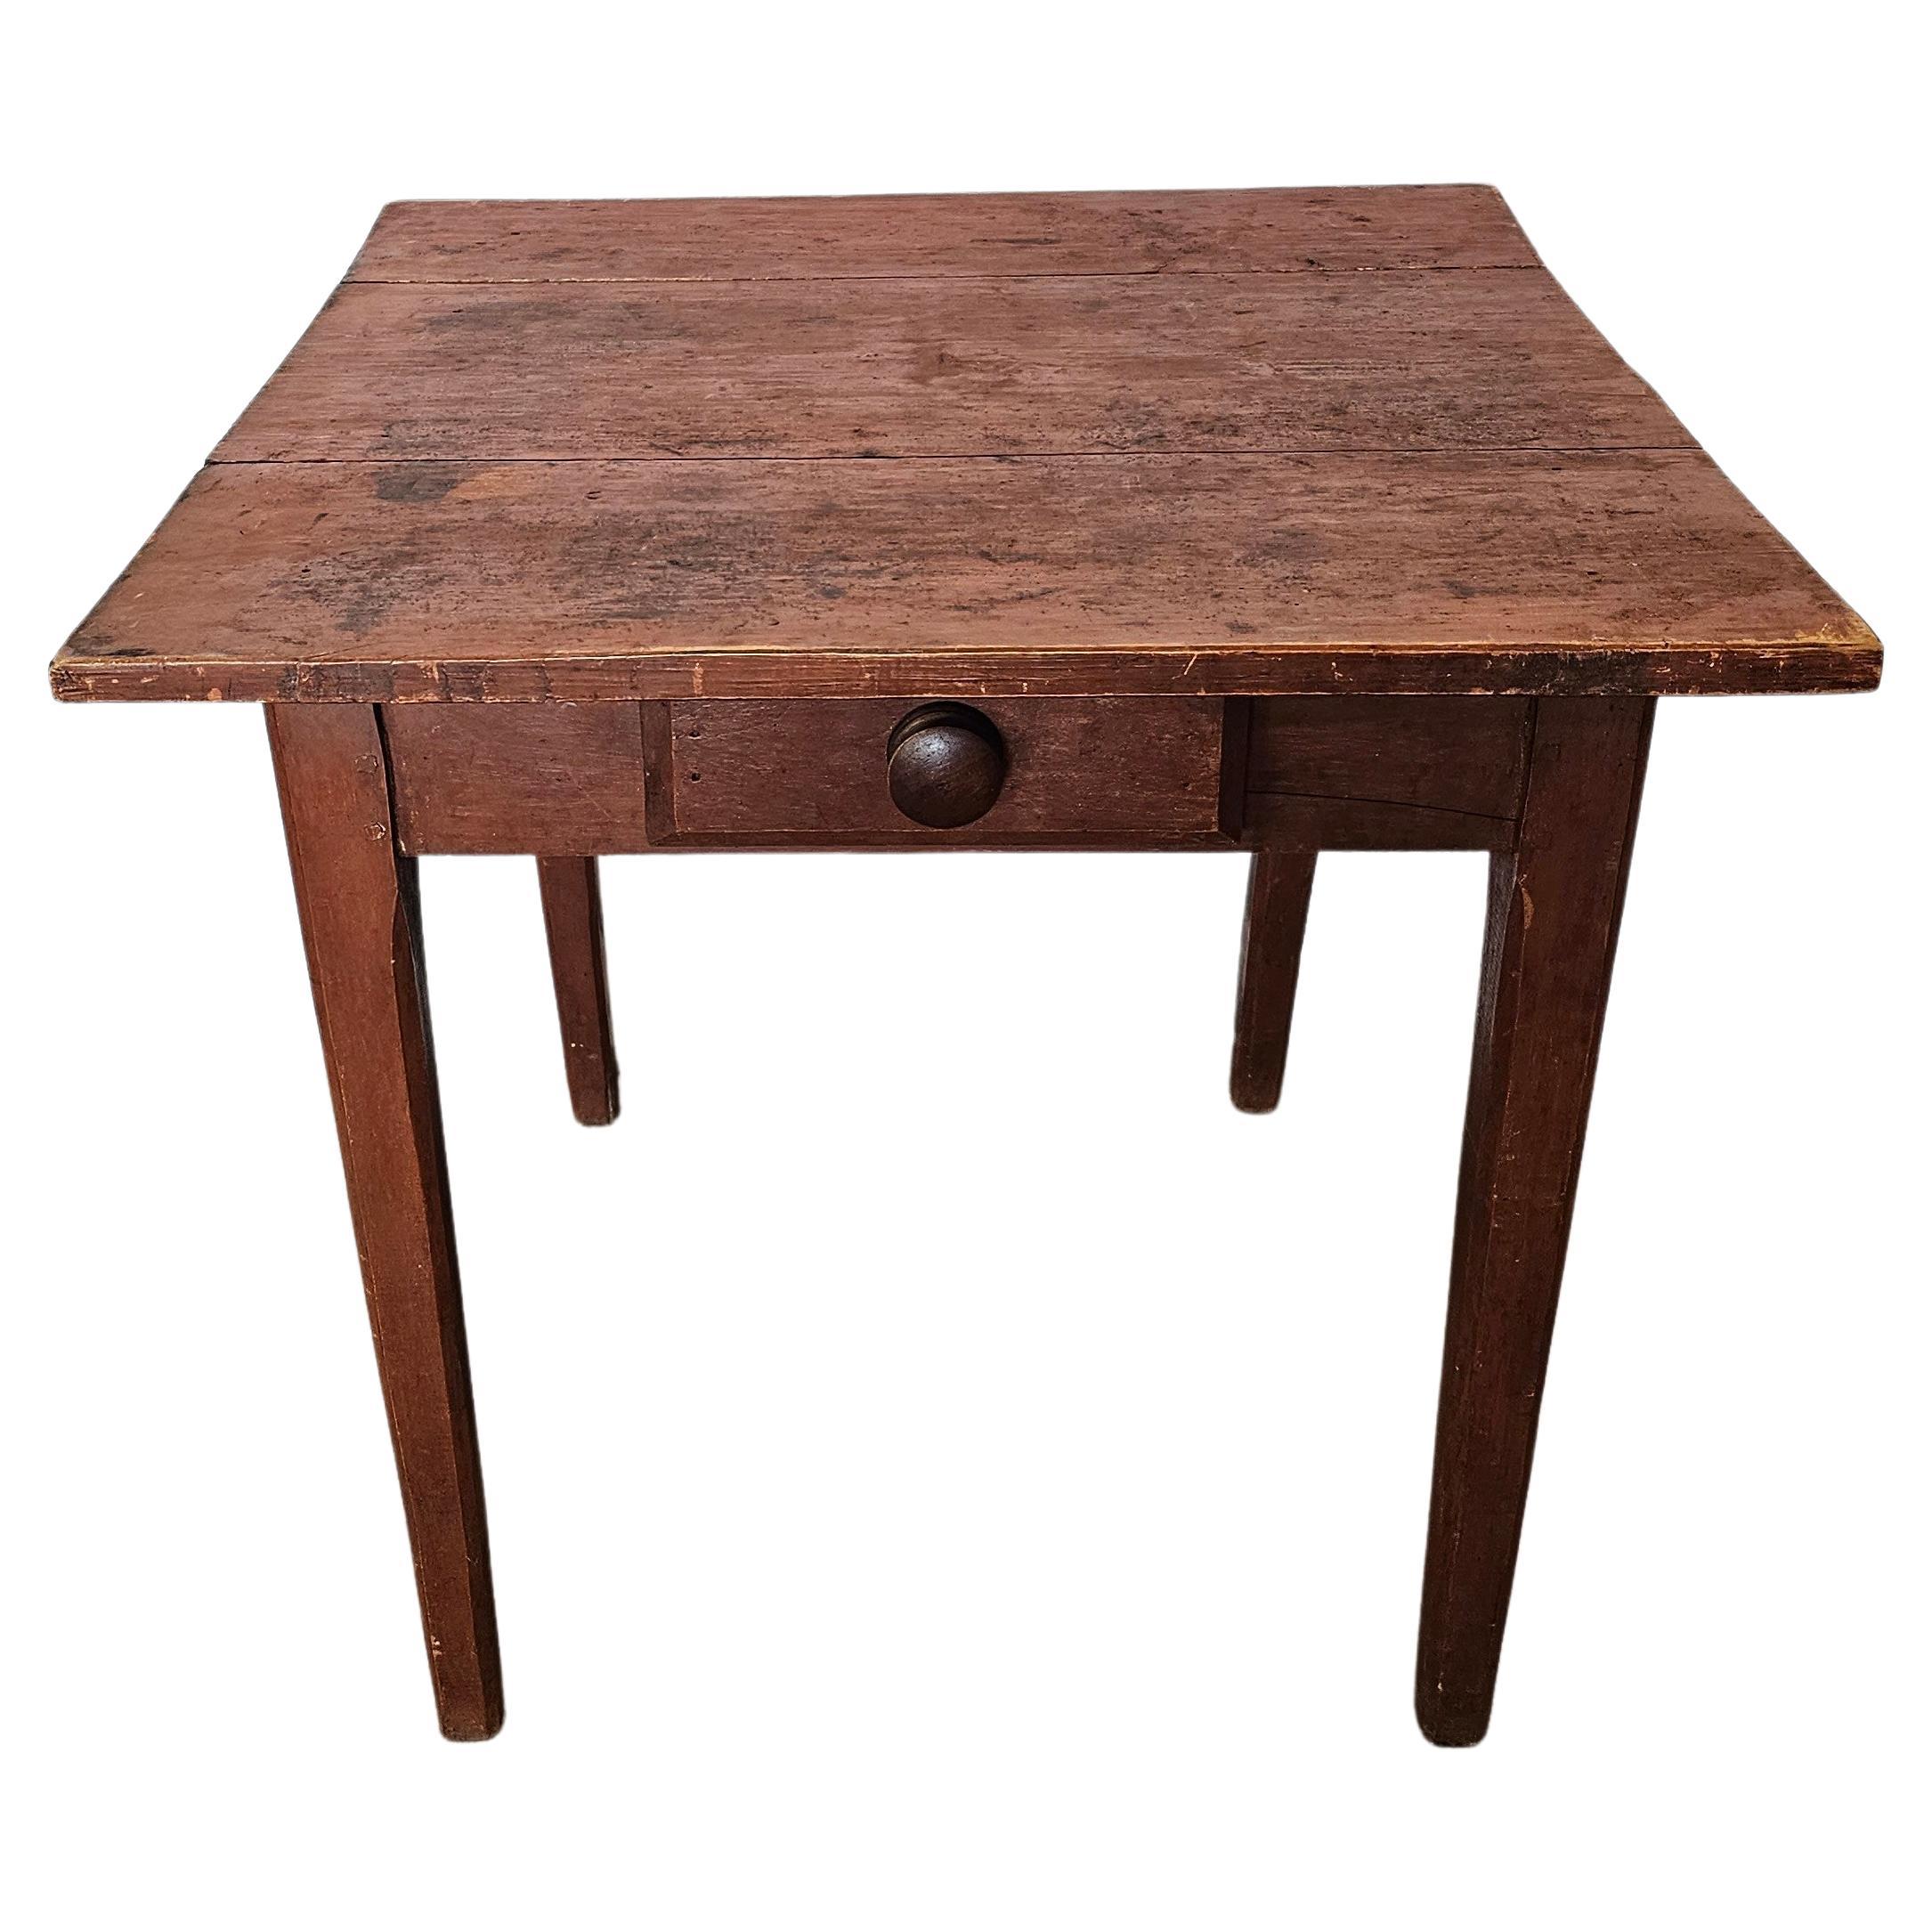 Early 19th Century American Primitve Texas Farmhouse Painted Pine Work Table 